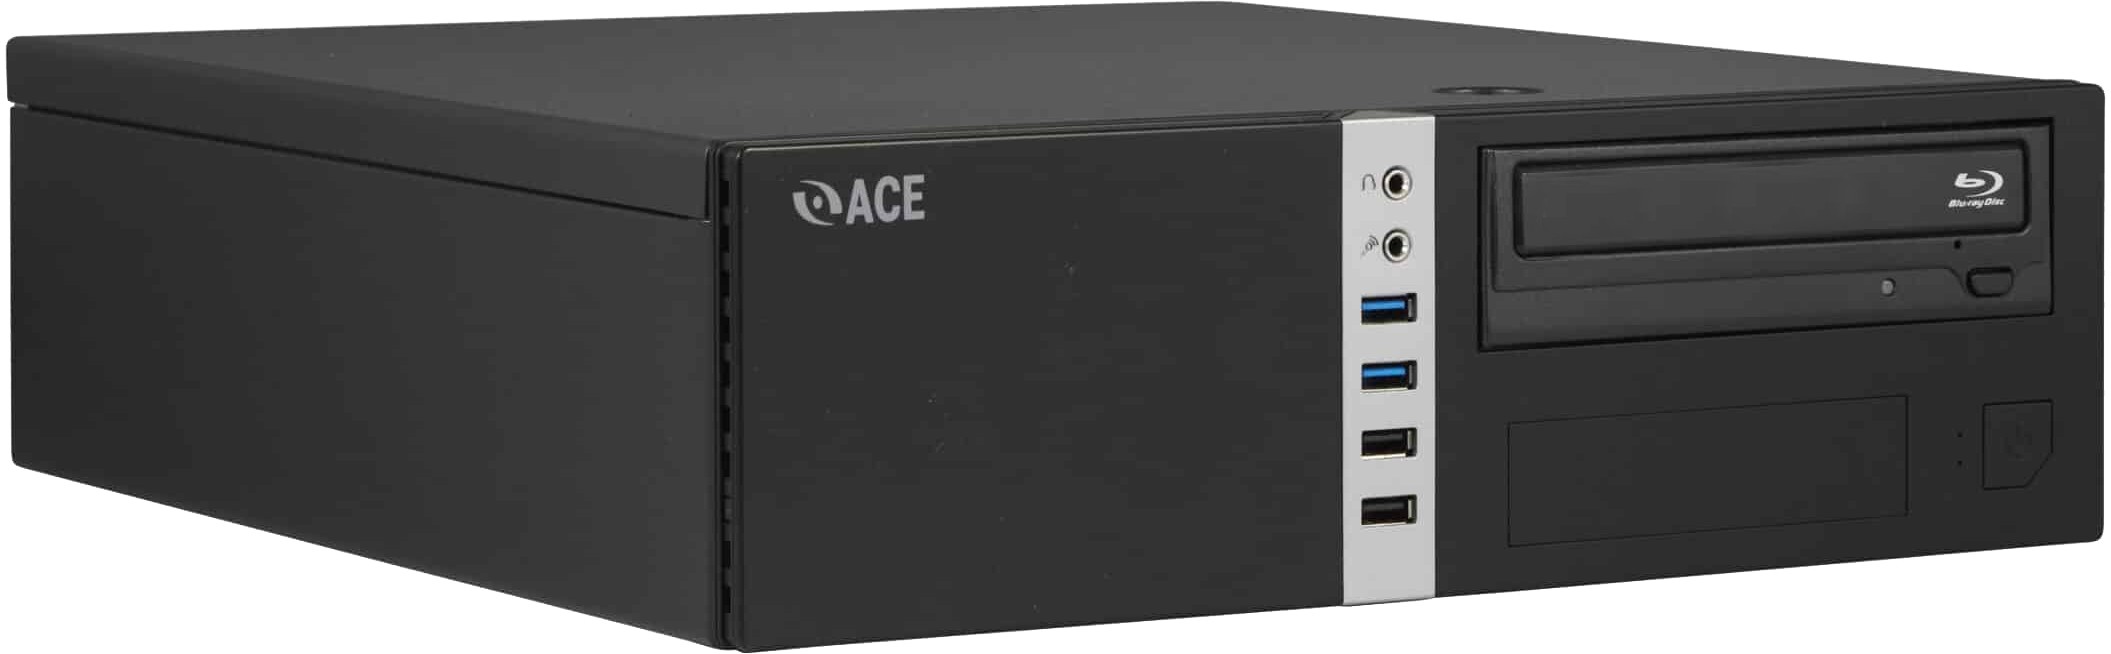 Black desktop computer case with front-facing USB ports, audio jacks, a Blu-ray drive, and the brand logo "ACE" on the left side. Integrated for GSA CCS-3 compatibility, it ensures seamless connectivity and high performance.